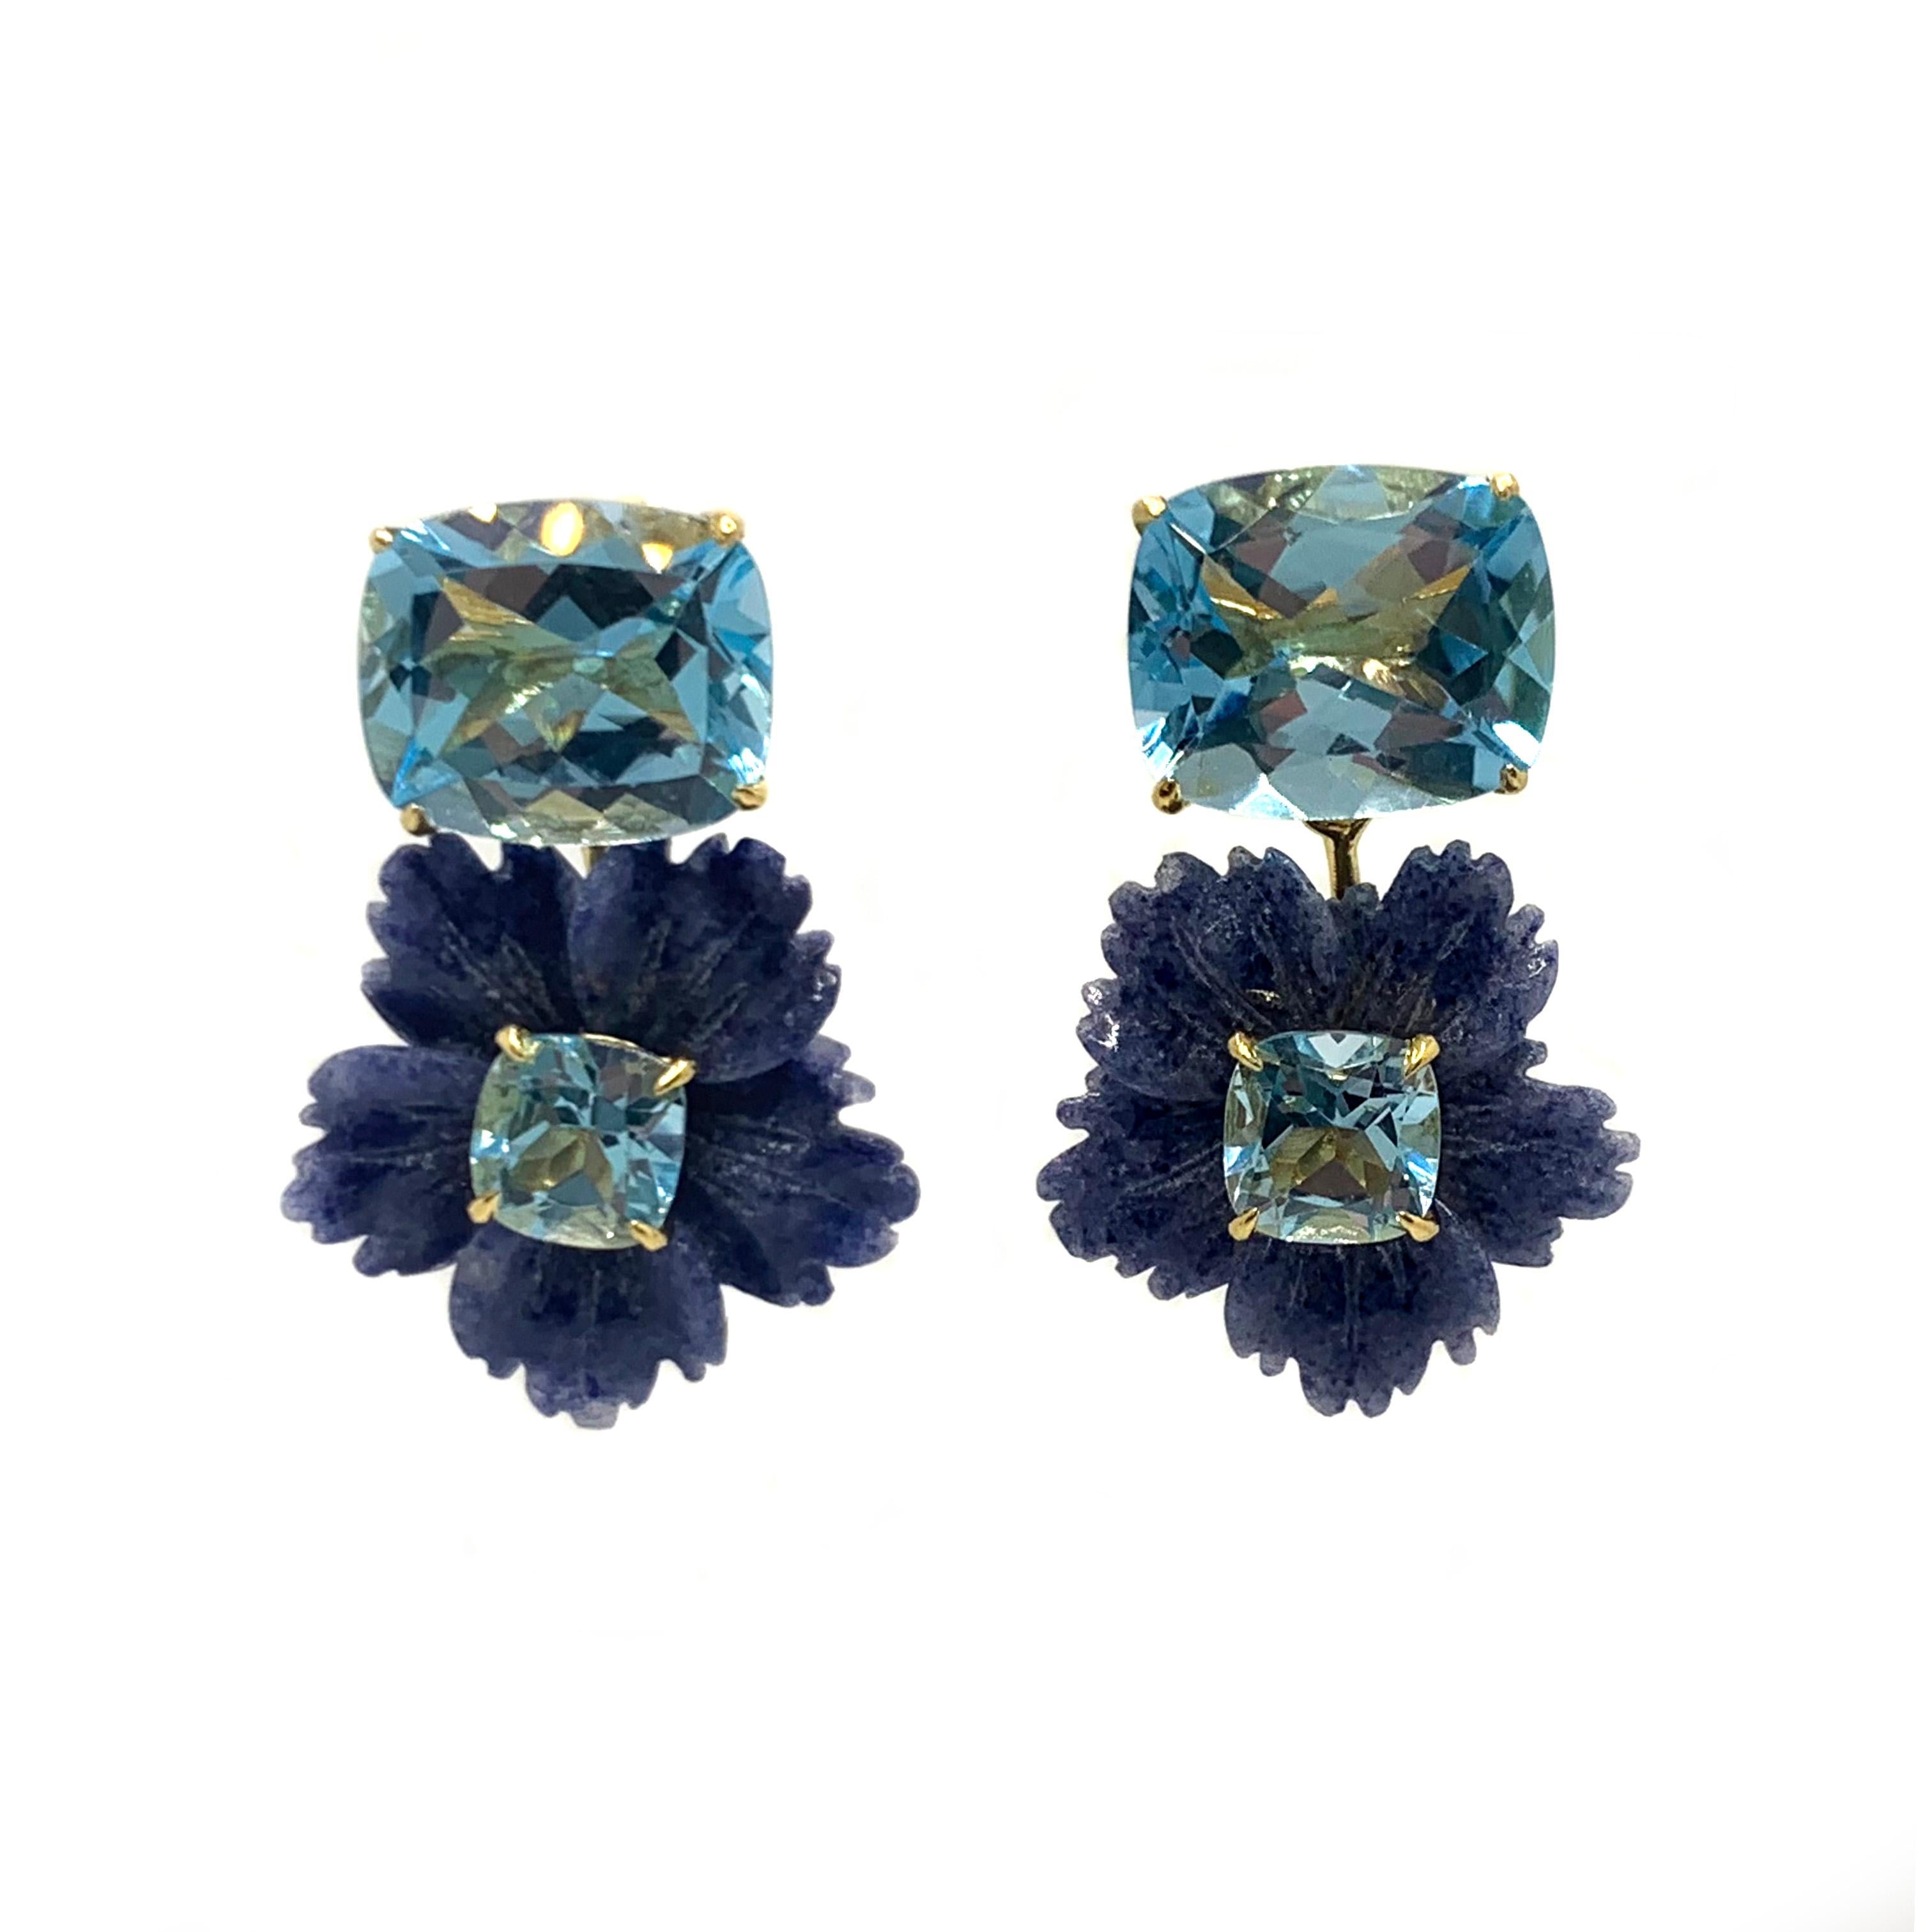 Bijoux Num's Cushion-cut Blue Topaz and Carved Blue Dumortierite Flower Drop Earrings

This gorgeous pair of earrings features beautiful cushion-cut sky blue topaz,  18mm denim-blue dumortierite carved into beautiful three dimension flower with